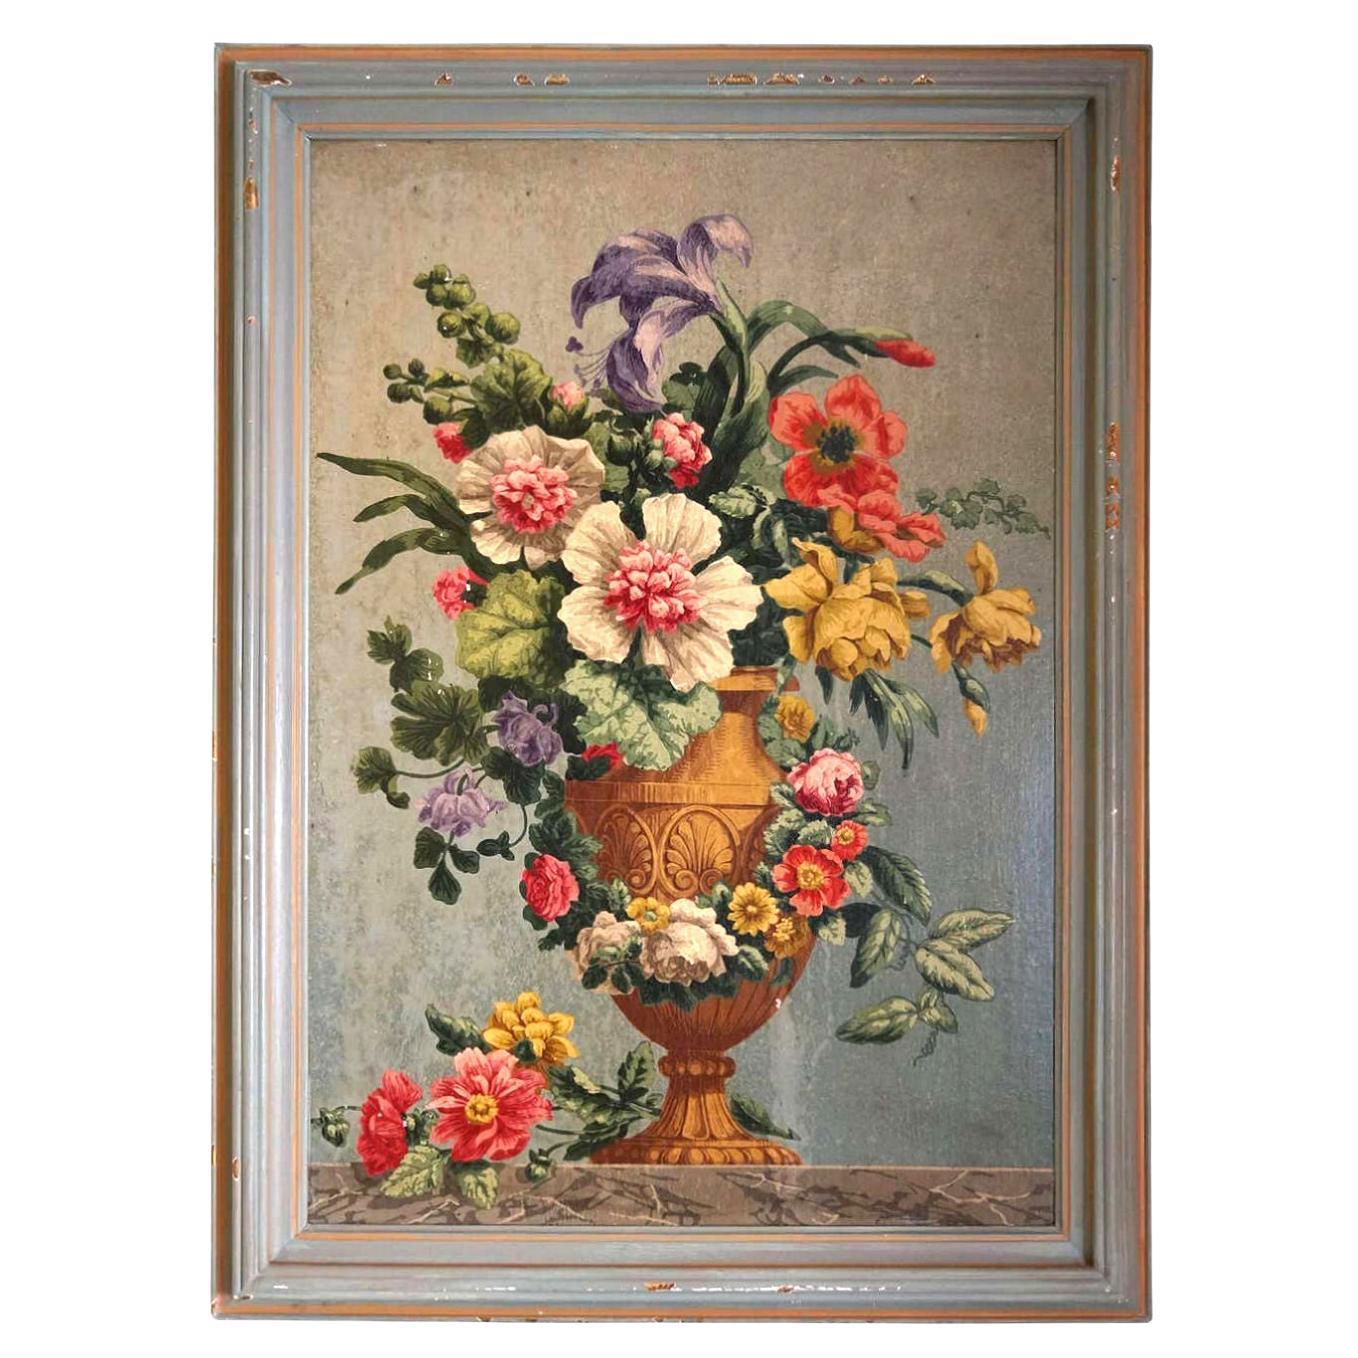 Oil on Board Painting of Still Life with Flowers in Urn